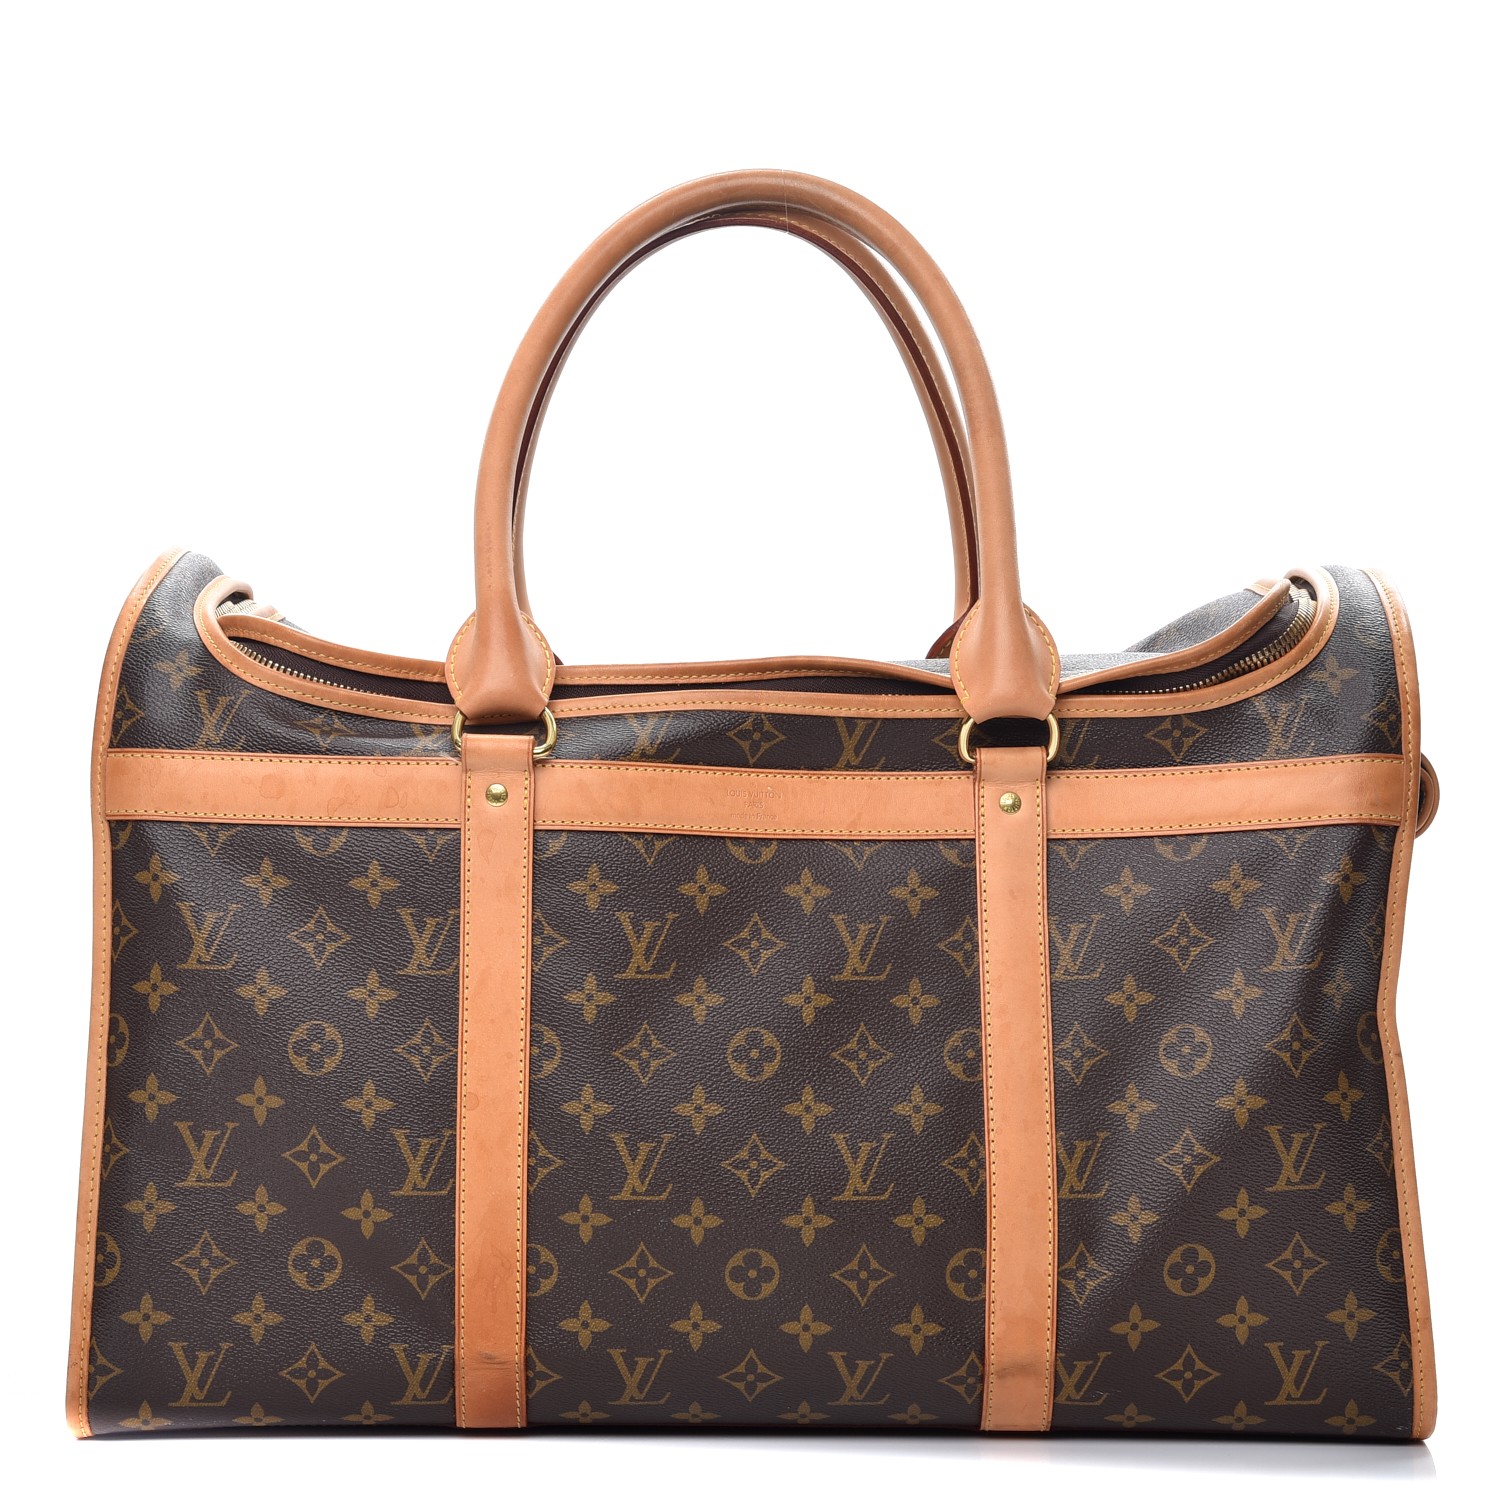 Louis Vuitton French Company Sac Chien Monogram Dog Carrier Travel